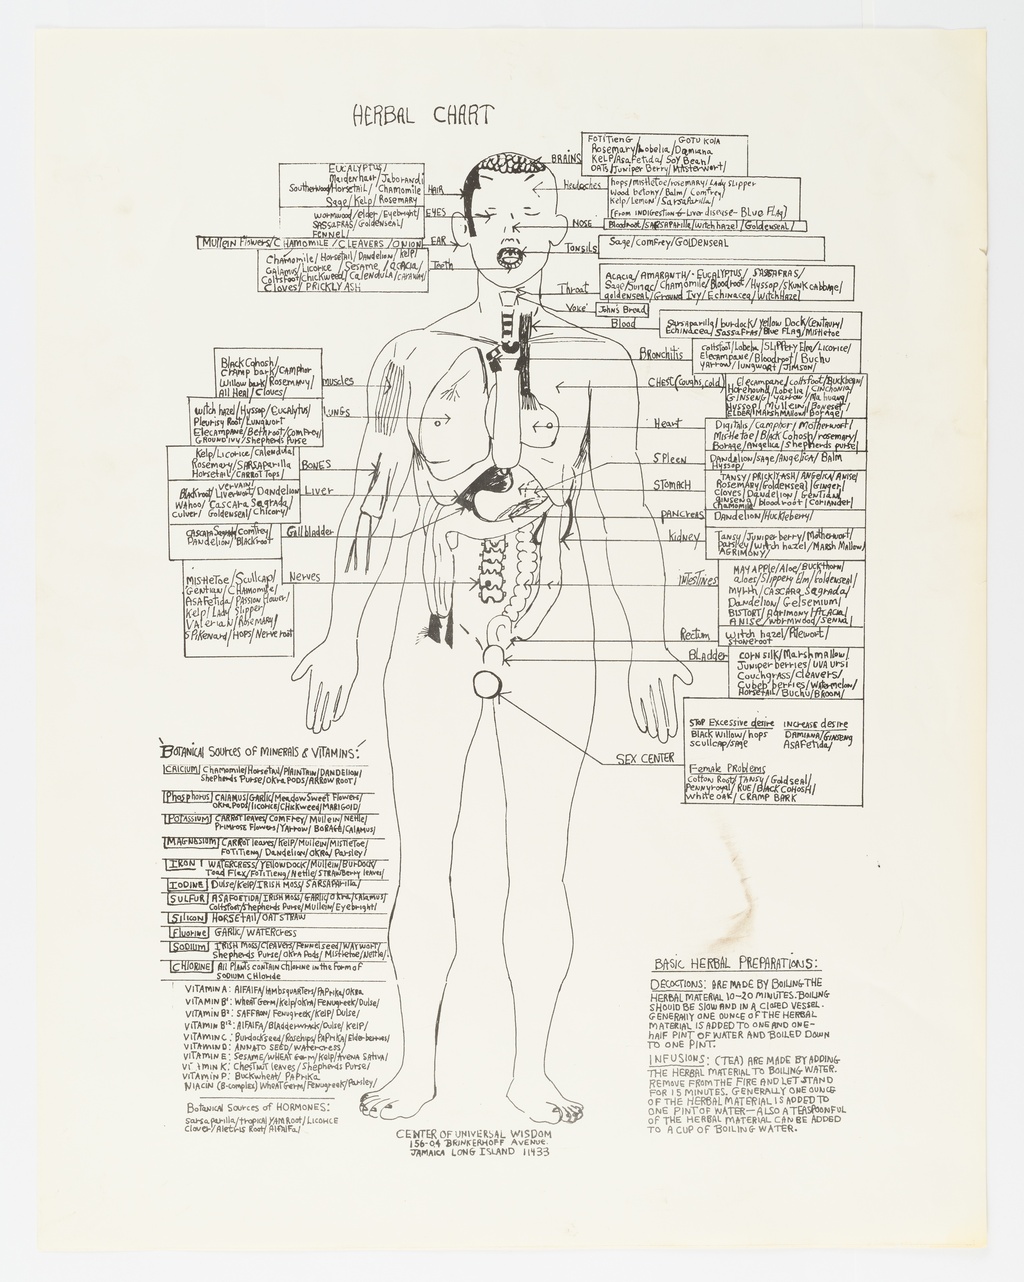 <p>An anatomical illustration of a human figure titled "Herbal Chart." Arrows point to parts of the figure and label them with botanic names and descriptions.&nbsp;</p>